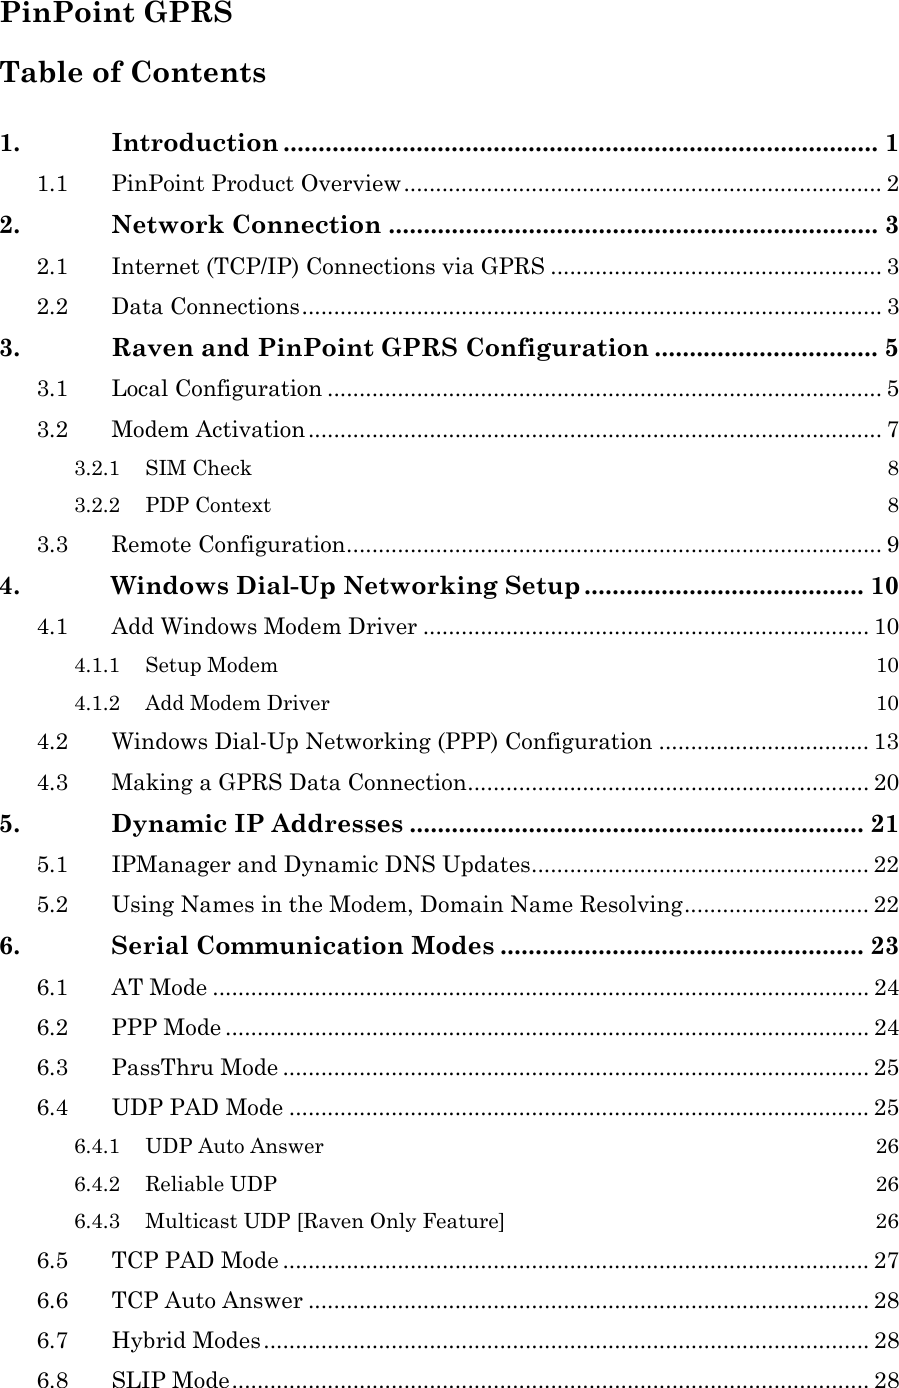   PinPoint GPRS Table of Contents  1. Introduction ..................................................................................... 1 1.1 PinPoint Product Overview........................................................................... 2 2. Network Connection ...................................................................... 3 2.1 Internet (TCP/IP) Connections via GPRS .................................................... 3 2.2 Data Connections........................................................................................... 3 3. Raven and PinPoint GPRS Configuration ................................ 5 3.1 Local Configuration ....................................................................................... 5 3.2 Modem Activation.......................................................................................... 7 3.2.1 SIM Check  8 3.2.2 PDP Context  8 3.3 Remote Configuration.................................................................................... 9 4. Windows Dial-Up Networking Setup ........................................ 10 4.1 Add Windows Modem Driver ...................................................................... 10 4.1.1 Setup Modem  10 4.1.2 Add Modem Driver  10 4.2 Windows Dial-Up Networking (PPP) Configuration ................................. 13 4.3 Making a GPRS Data Connection............................................................... 20 5. Dynamic IP Addresses ................................................................. 21 5.1 IPManager and Dynamic DNS Updates..................................................... 22 5.2 Using Names in the Modem, Domain Name Resolving............................. 22 6. Serial Communication Modes .................................................... 23 6.1 AT Mode ....................................................................................................... 24 6.2 PPP Mode ..................................................................................................... 24 6.3 PassThru Mode ............................................................................................ 25 6.4 UDP PAD Mode ........................................................................................... 25 6.4.1 UDP Auto Answer  26 6.4.2 Reliable UDP  26 6.4.3 Multicast UDP [Raven Only Feature]  26 6.5 TCP PAD Mode ............................................................................................ 27 6.6 TCP Auto Answer ........................................................................................ 28 6.7 Hybrid Modes............................................................................................... 28 6.8 SLIP Mode.................................................................................................... 28 